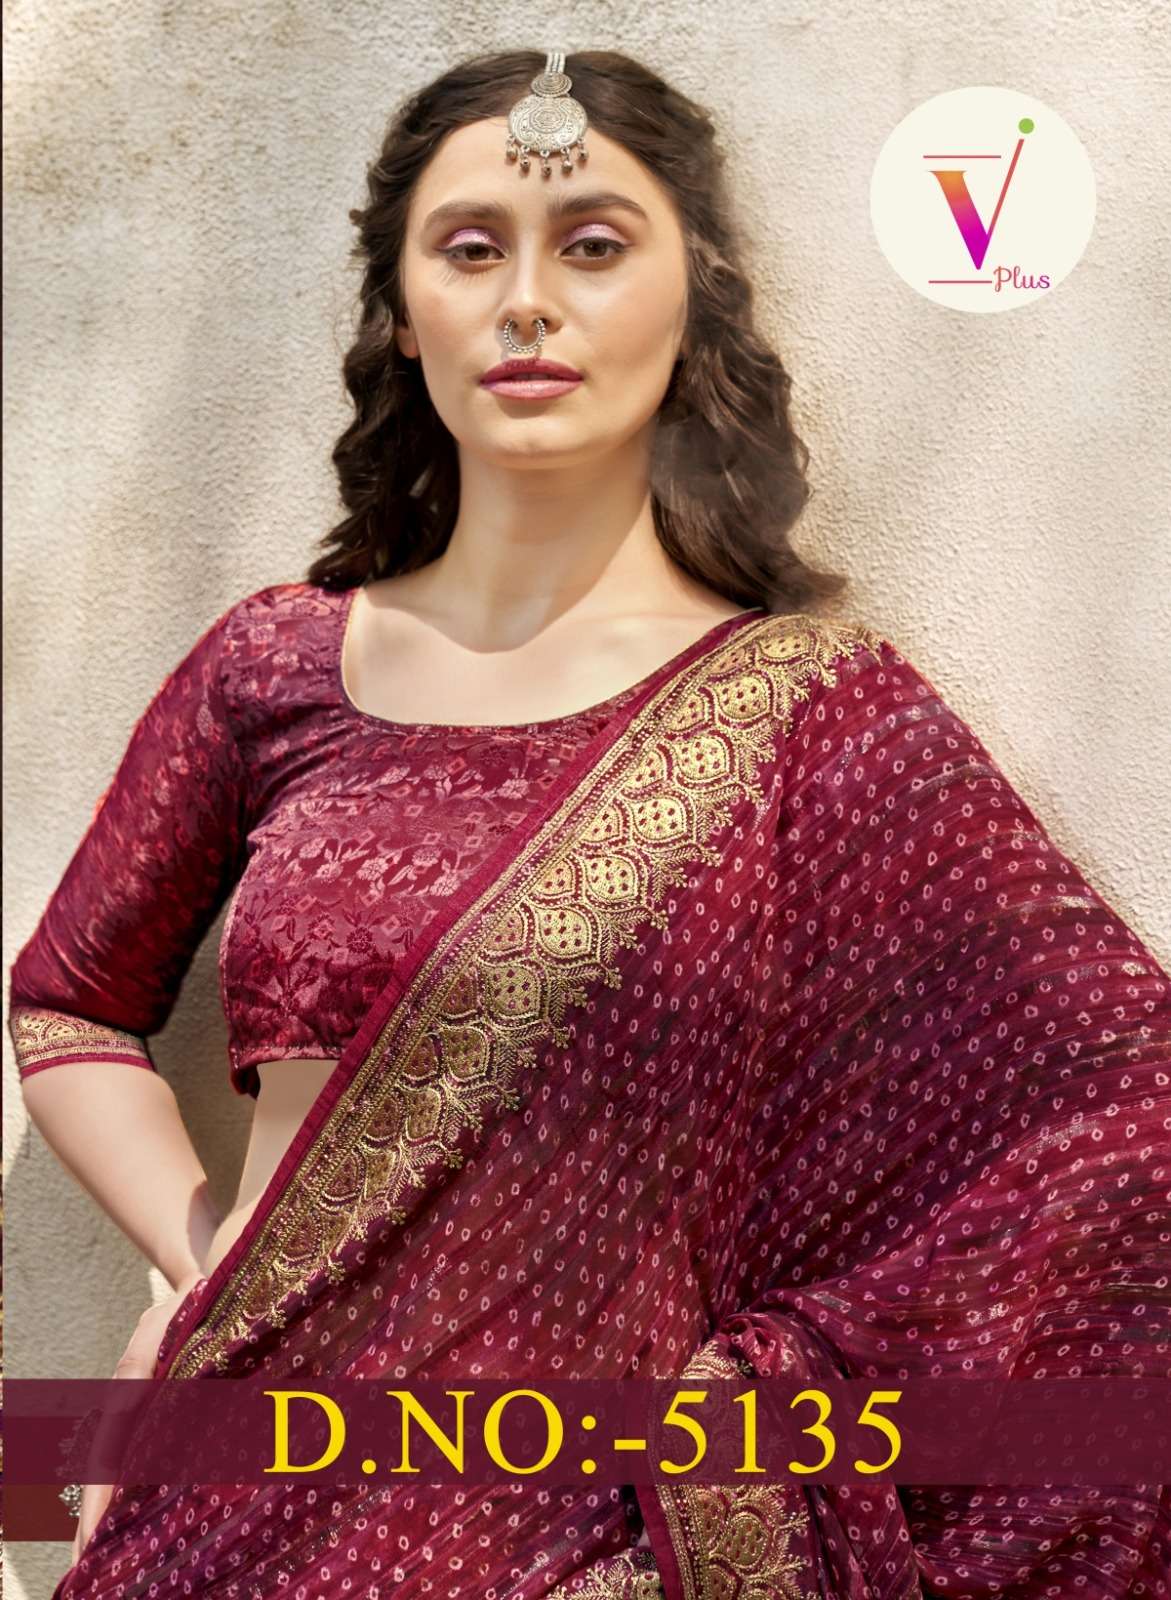 5135 By V Plus 18891 To 18894 Series Indian Traditional Wear Collection Beautiful Stylish Fancy Colorful Party Wear & Occasional Wear Georgette Print Sarees At Wholesale Price